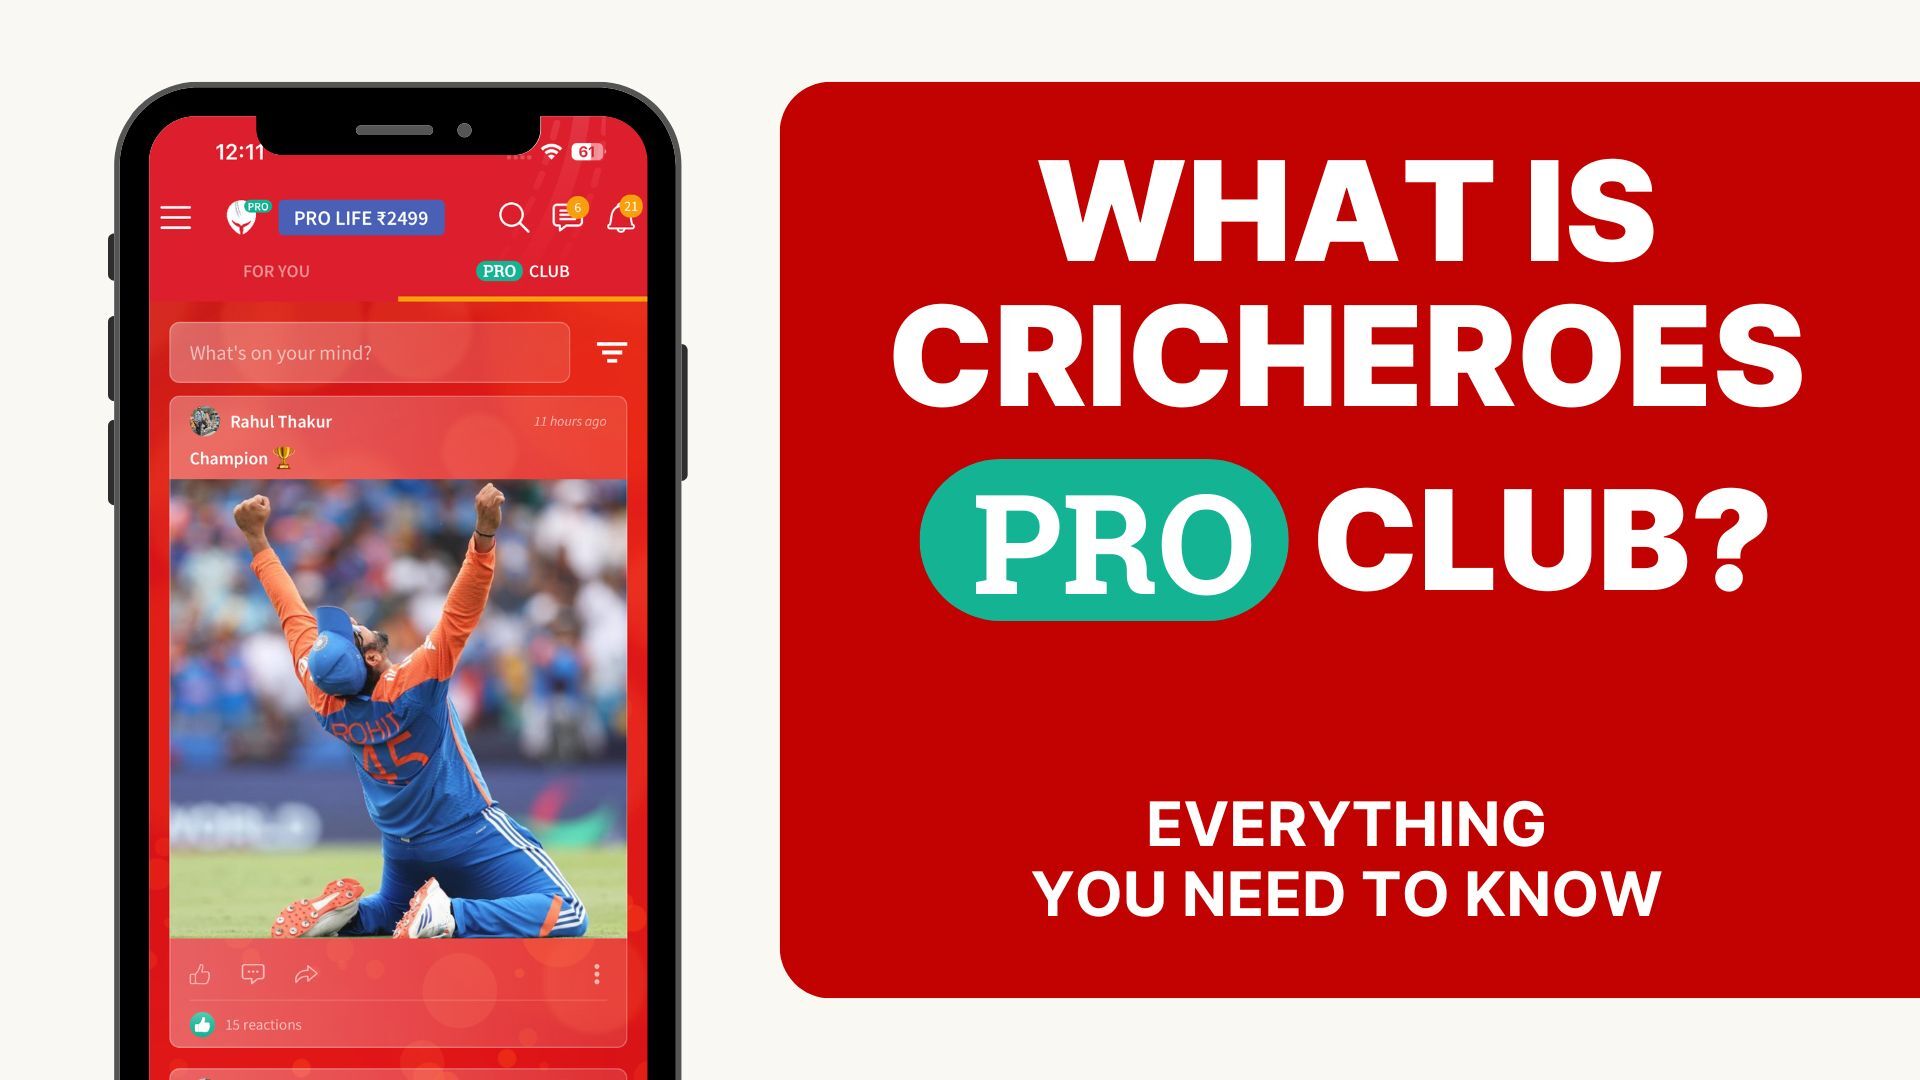 What is Cricheroes pro club